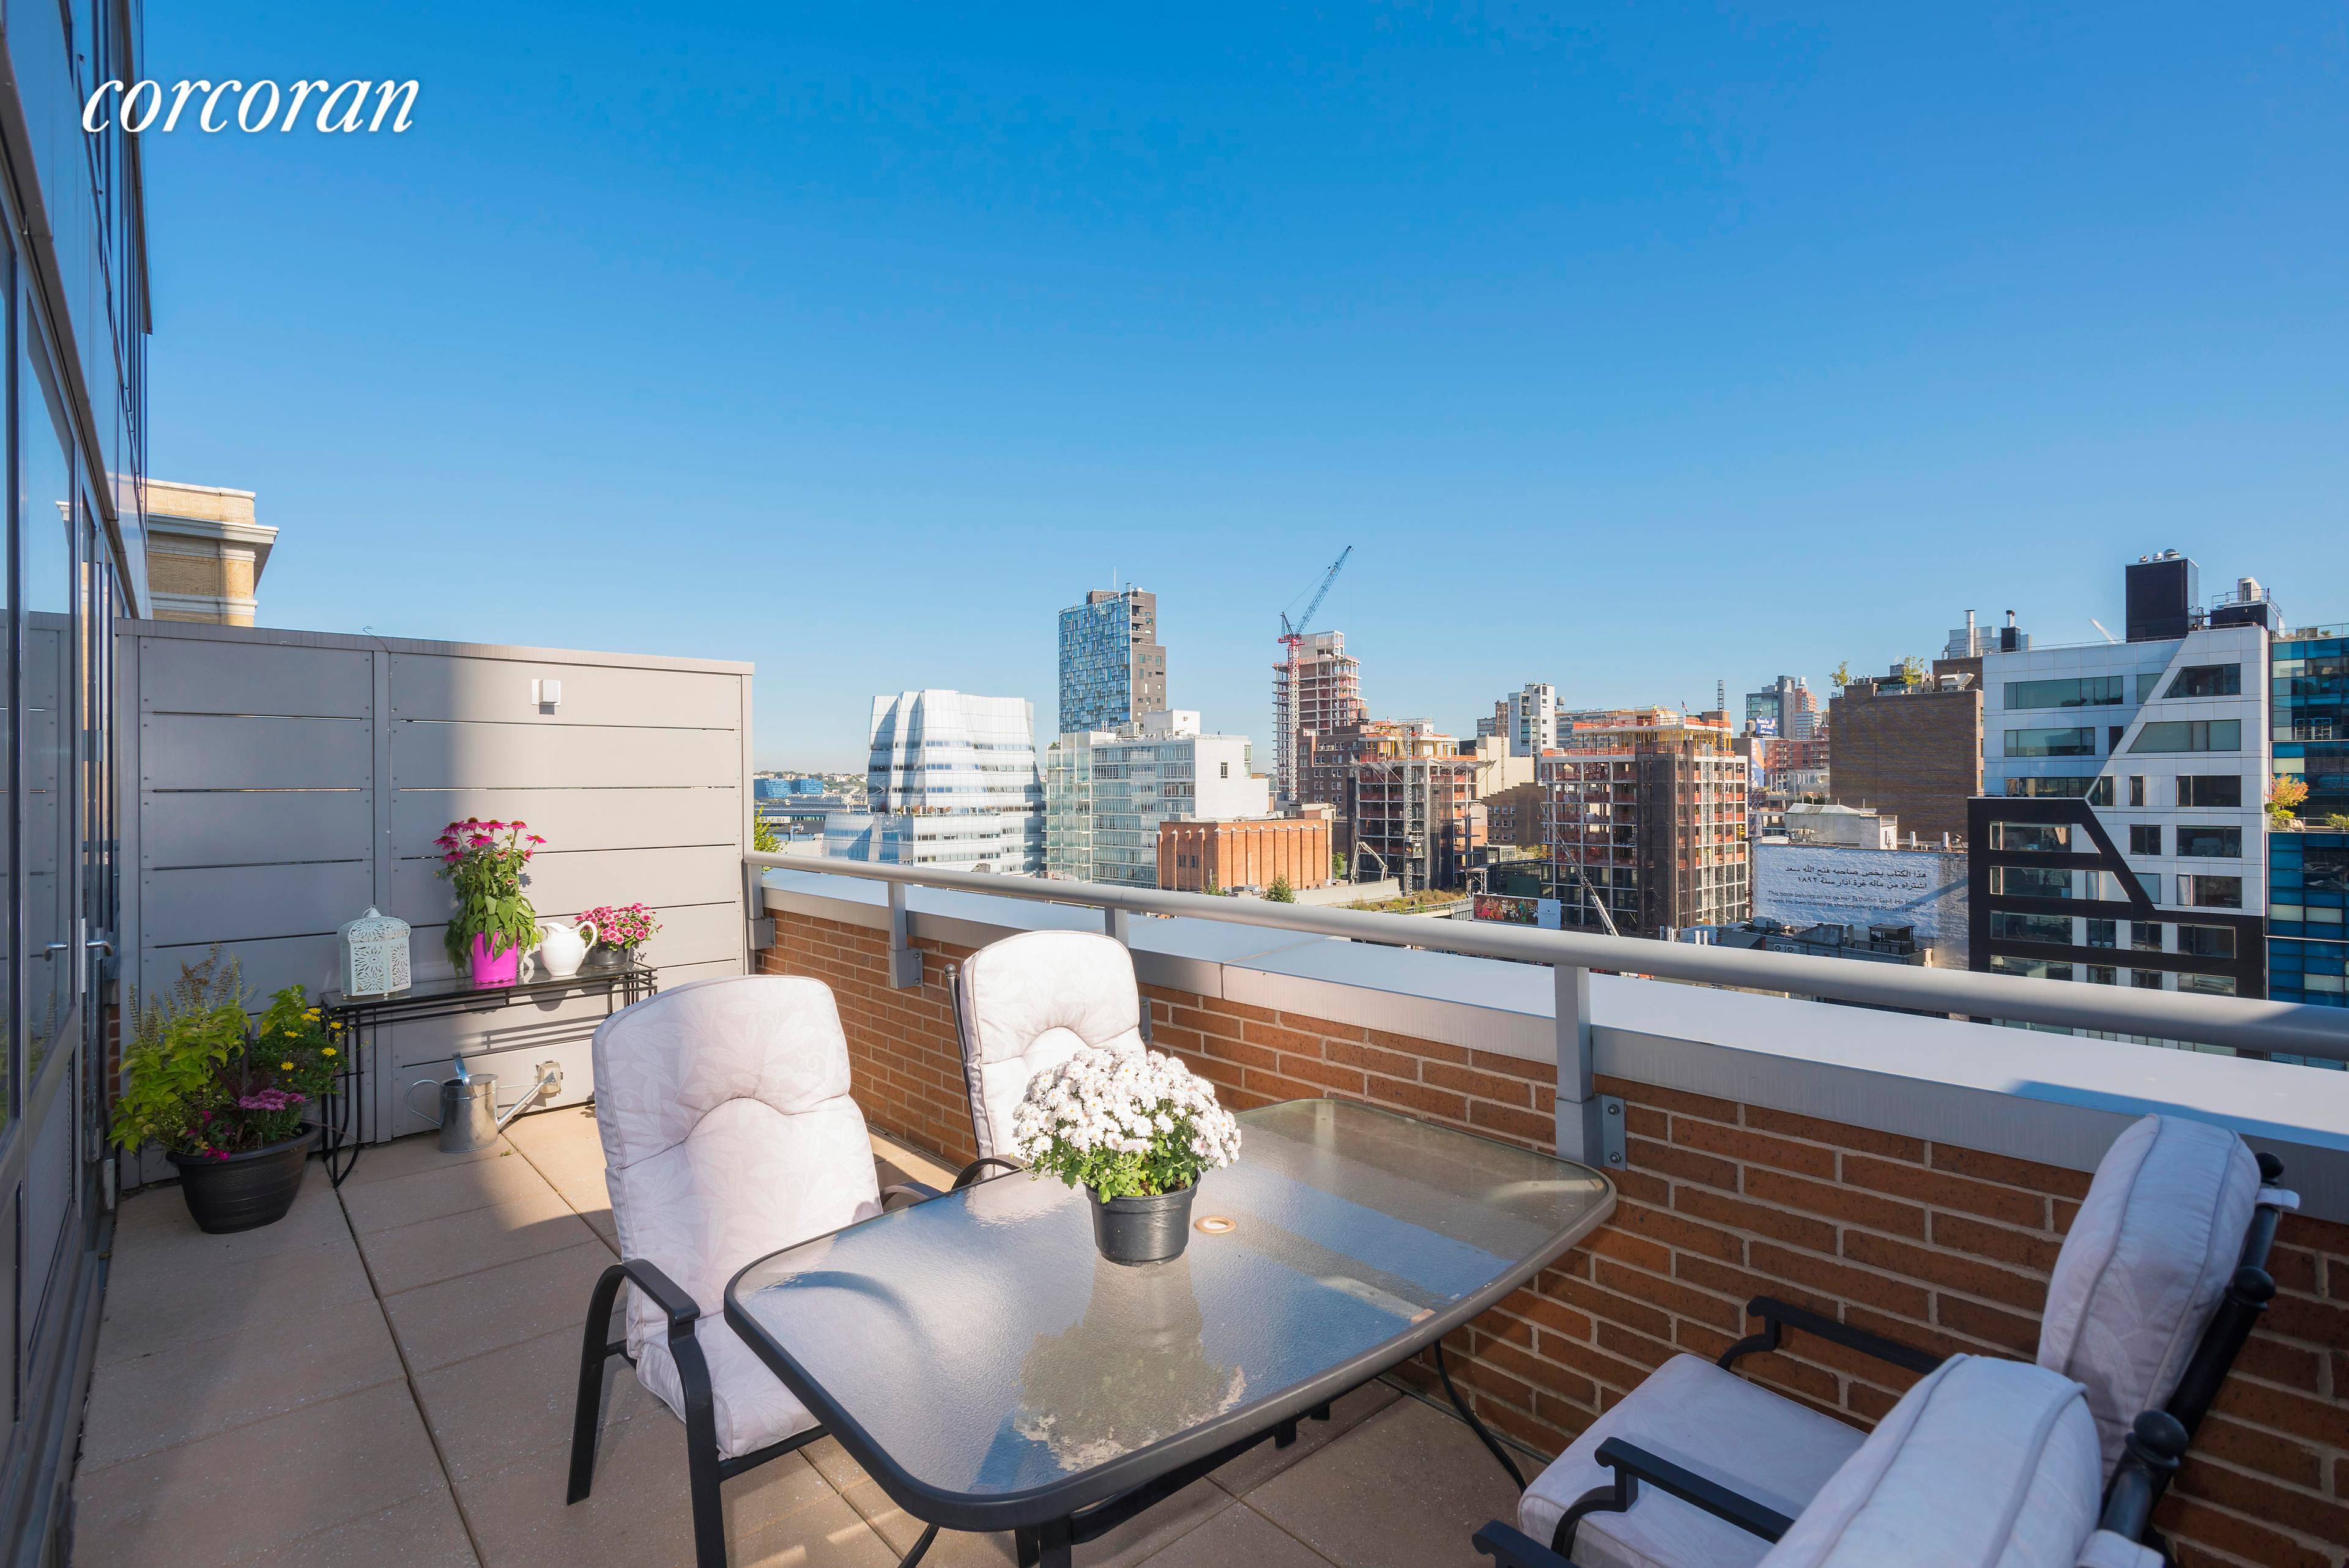 Perfect one bedroom with private terrace and sweeping views available at The Caledonia, one of West Chelsea and the Meatpacking's premier ultra luxury buildings.